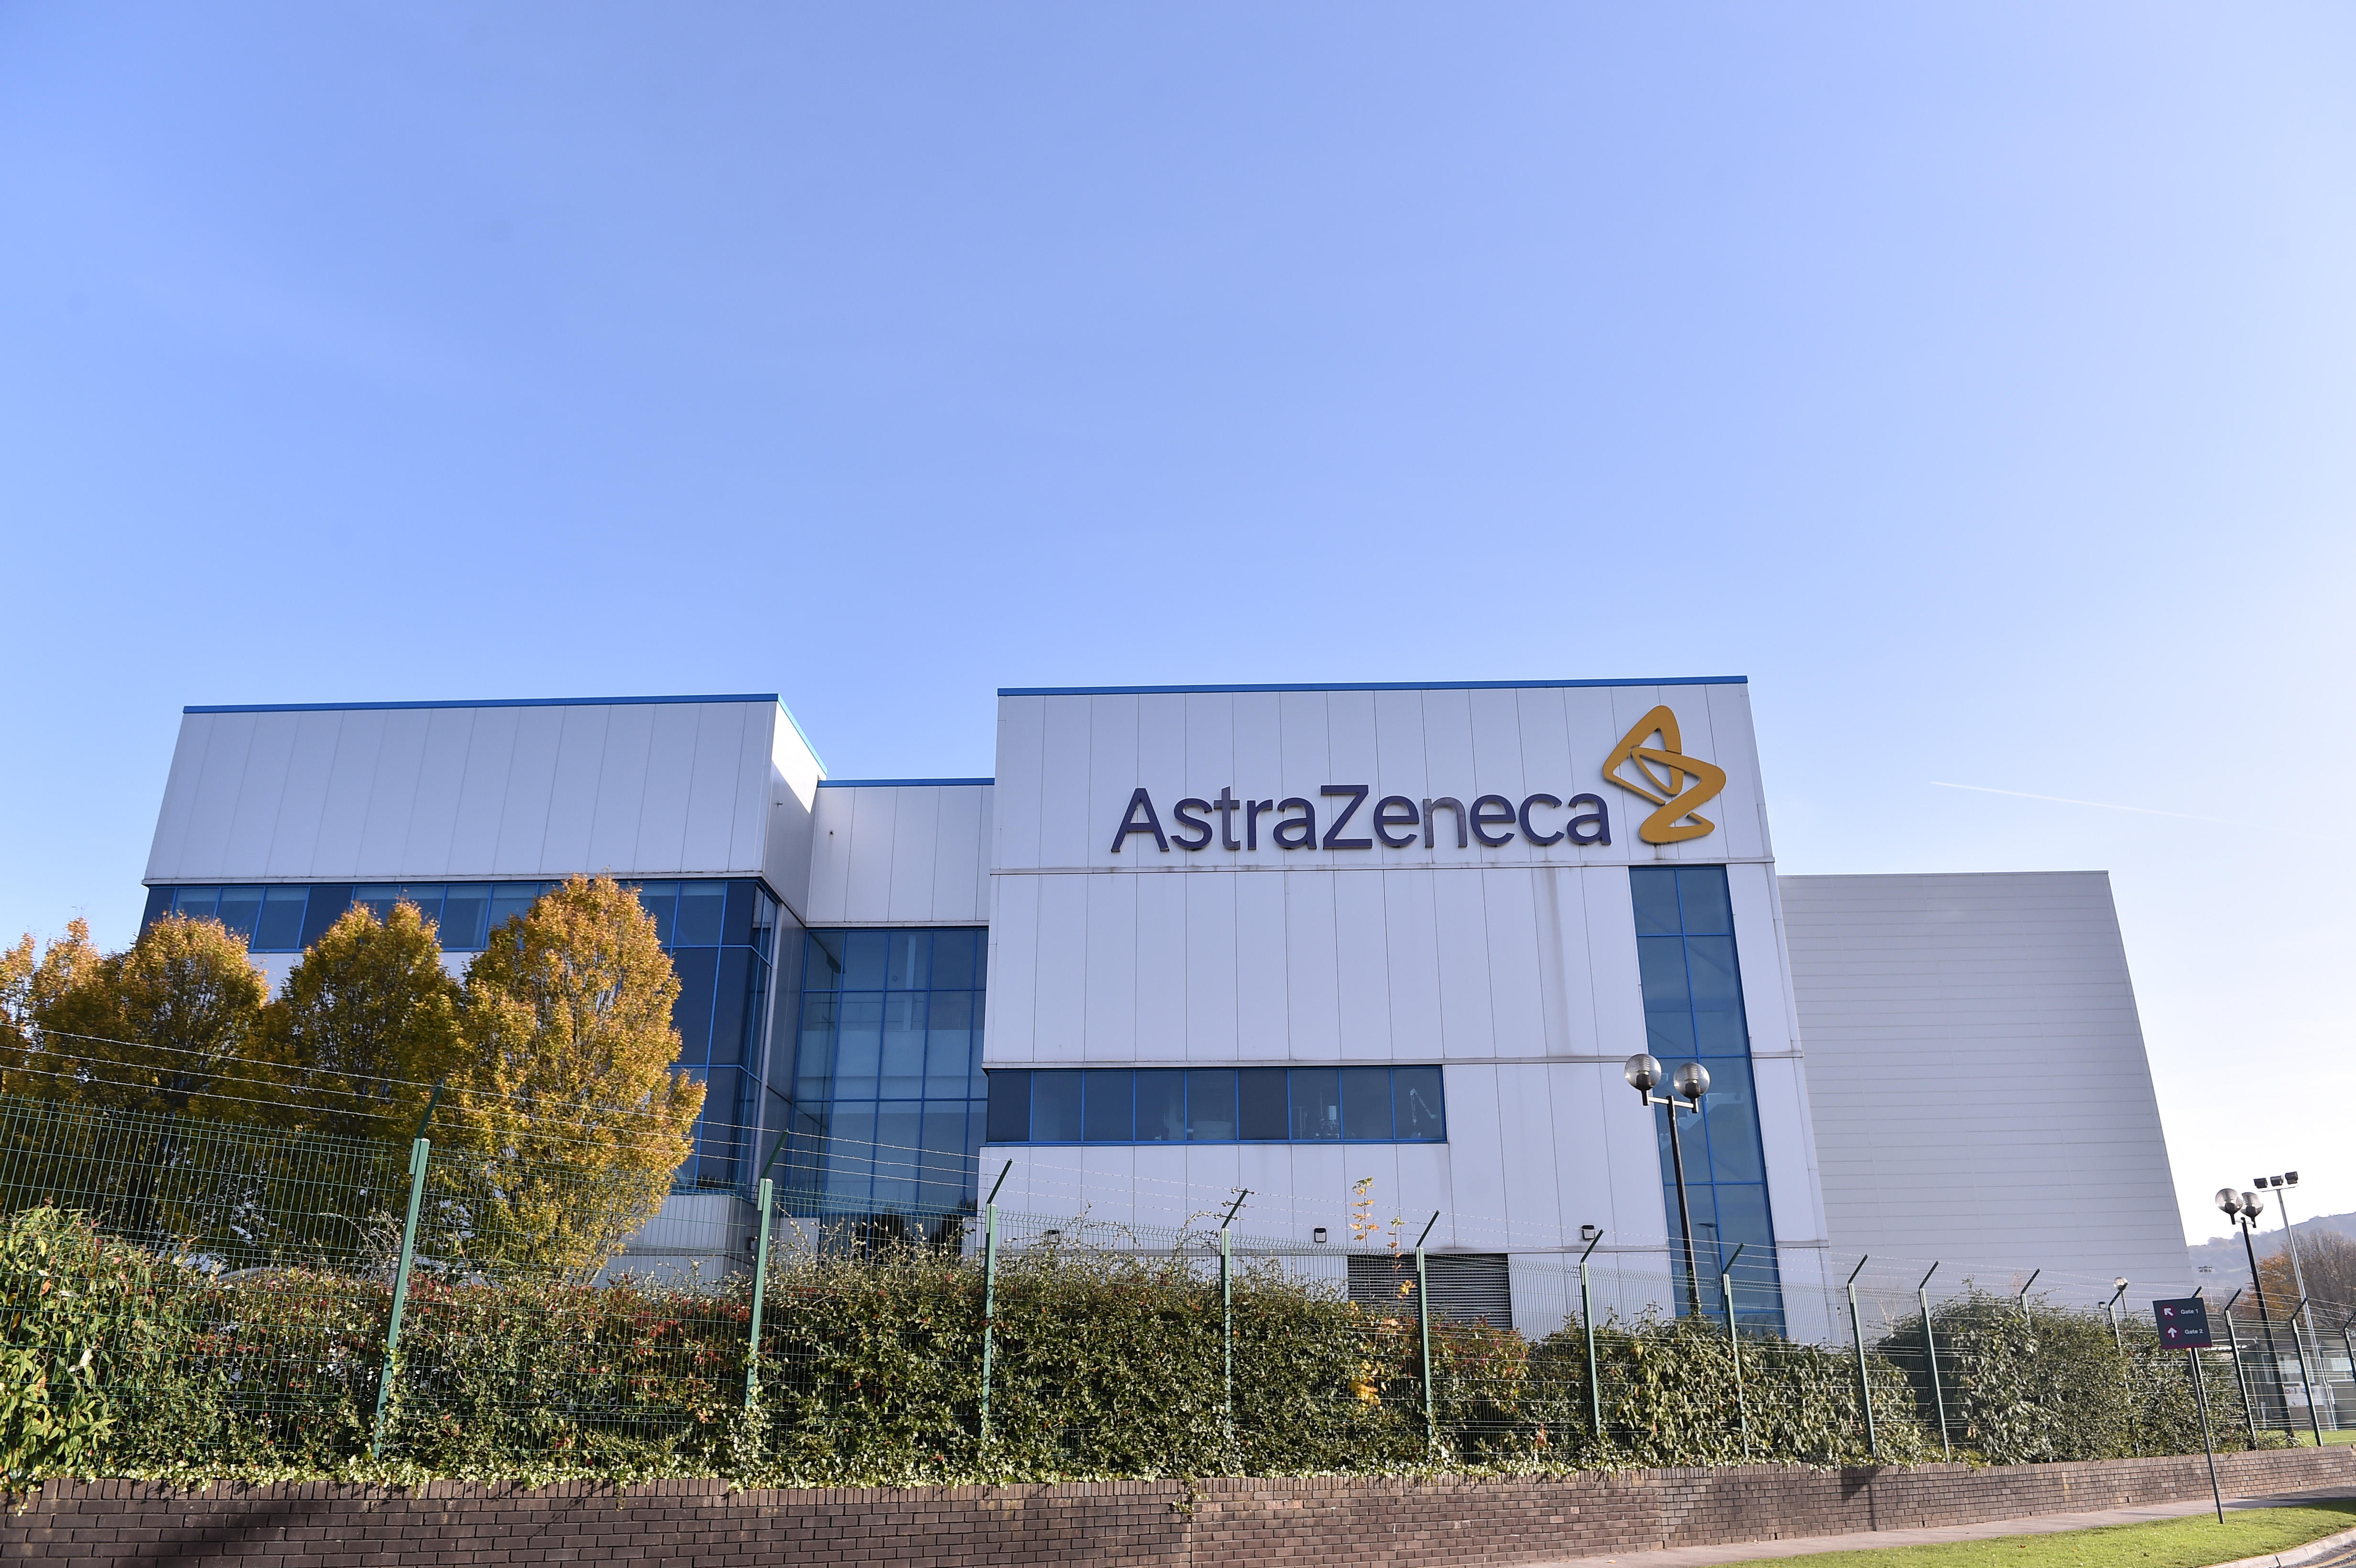 A general view outside AstraZeneca Millcourt center in England.